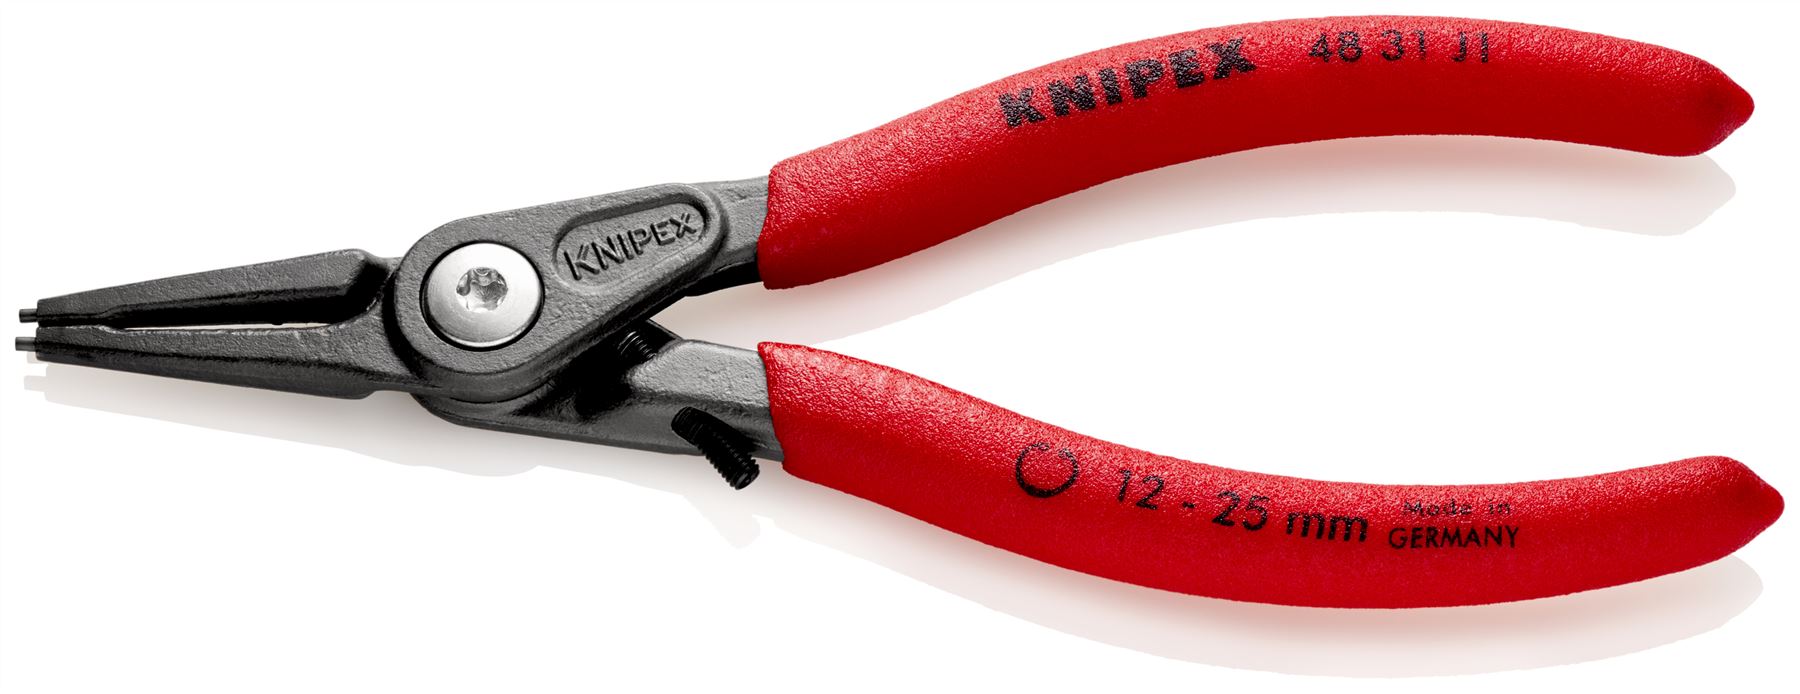 KNIPEX Precision Circlip Pliers for Internal Circlips in Bore Holes with Overexpansion Guard 140mm 48 31 J1